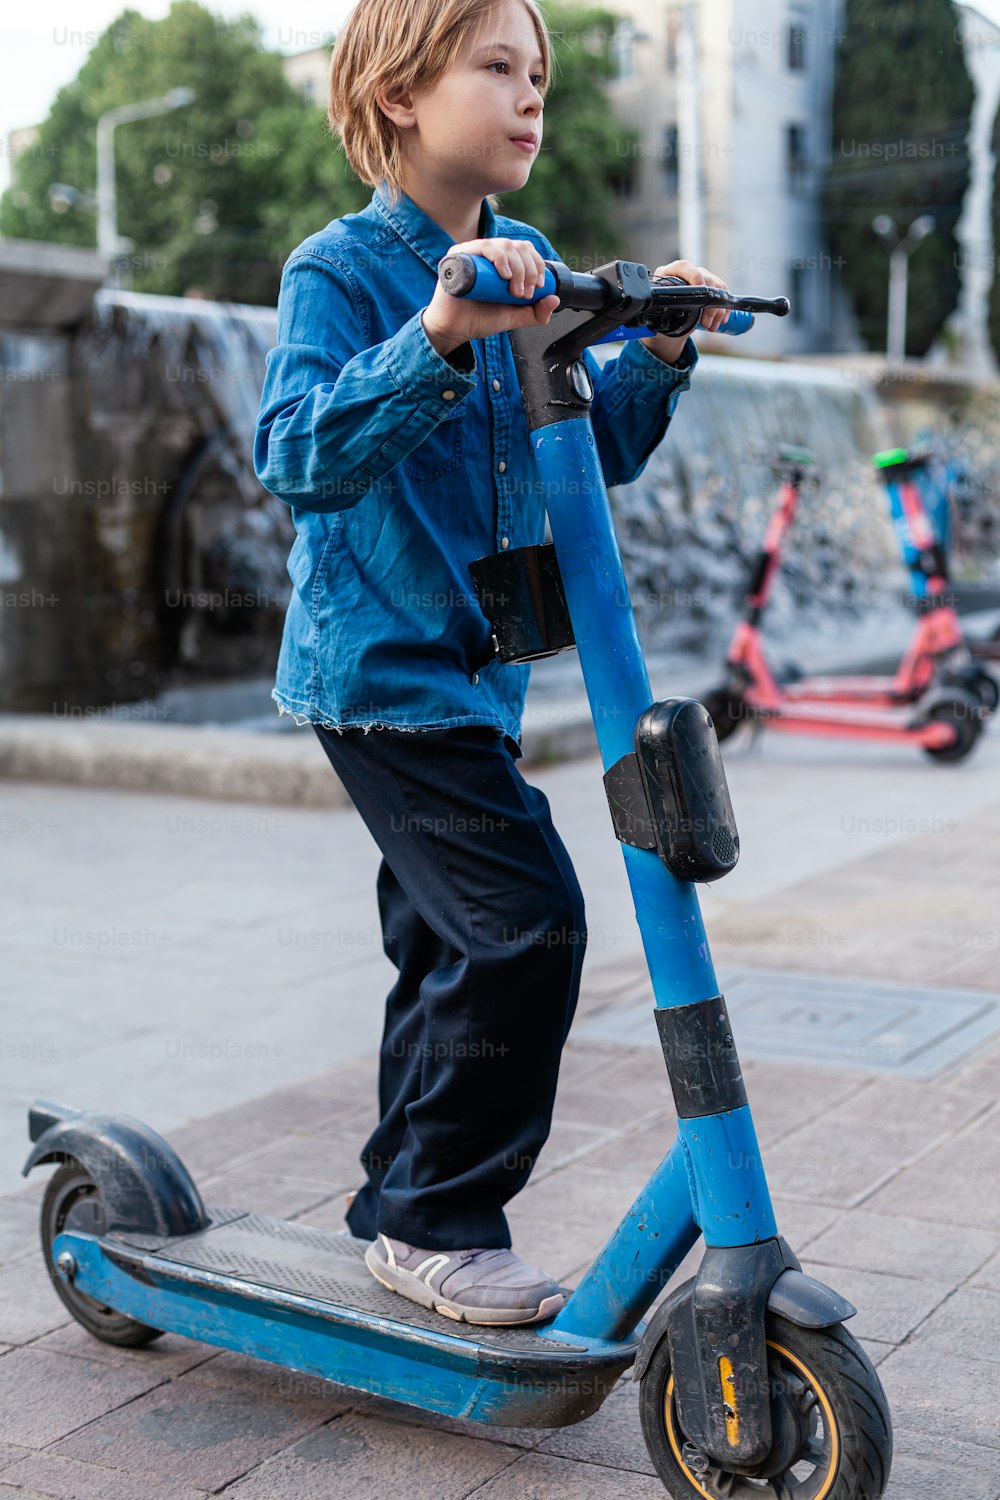 a young boy riding a scooter on a sidewalk